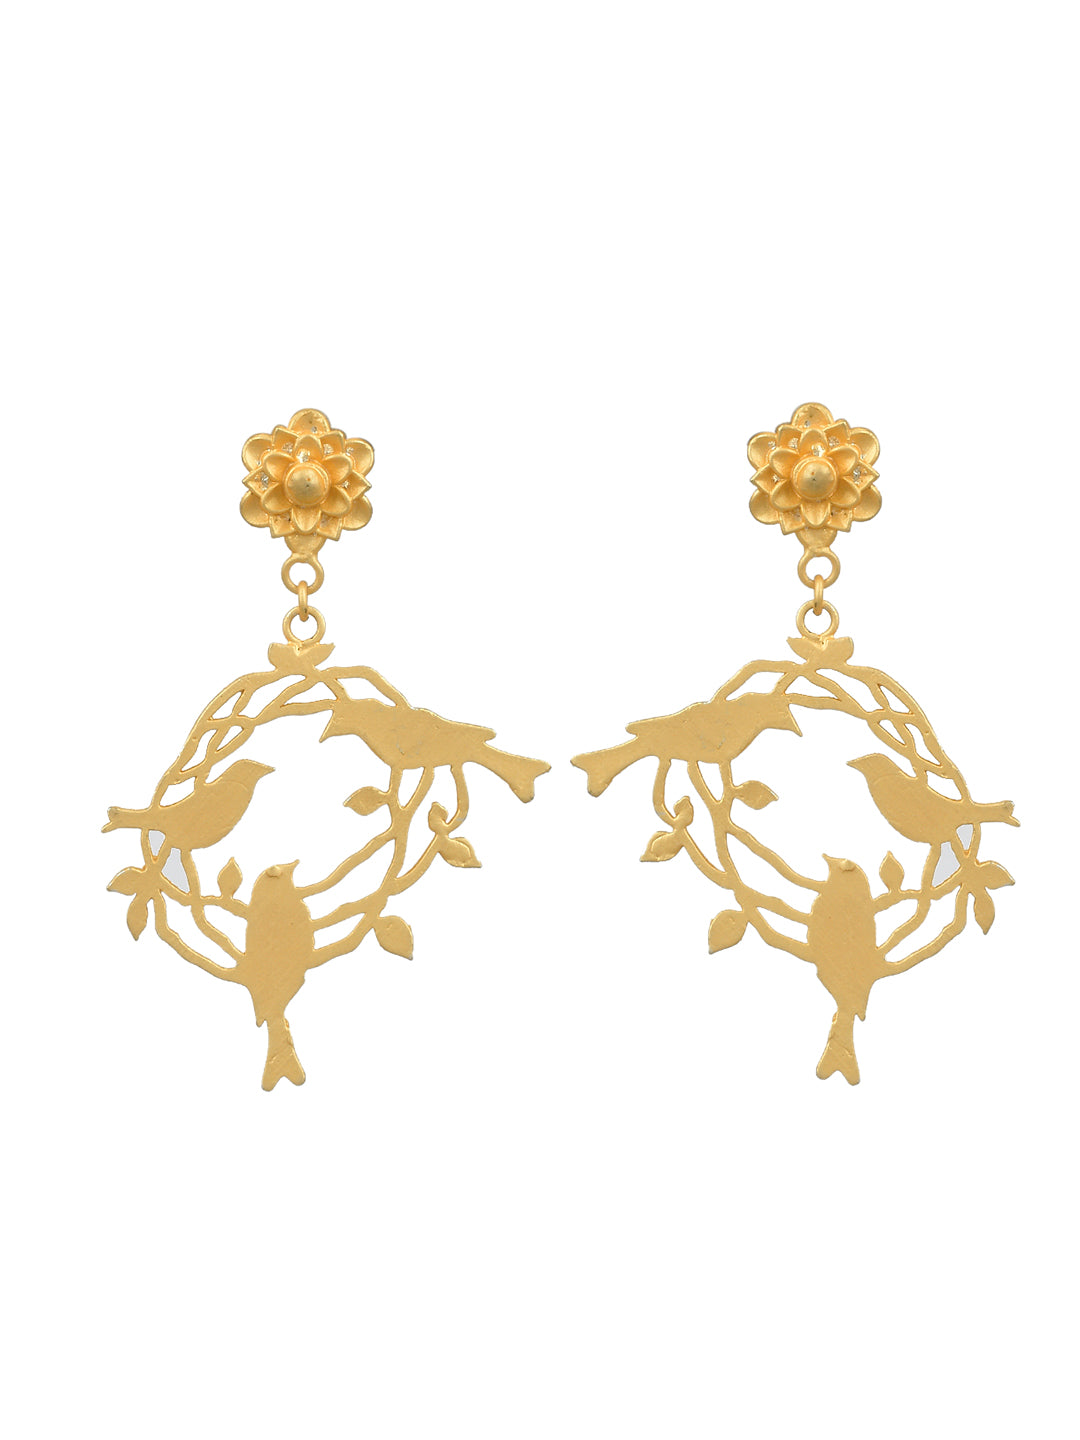 Floral Gold Plated Stud Circle Of Life Earrings For Girls